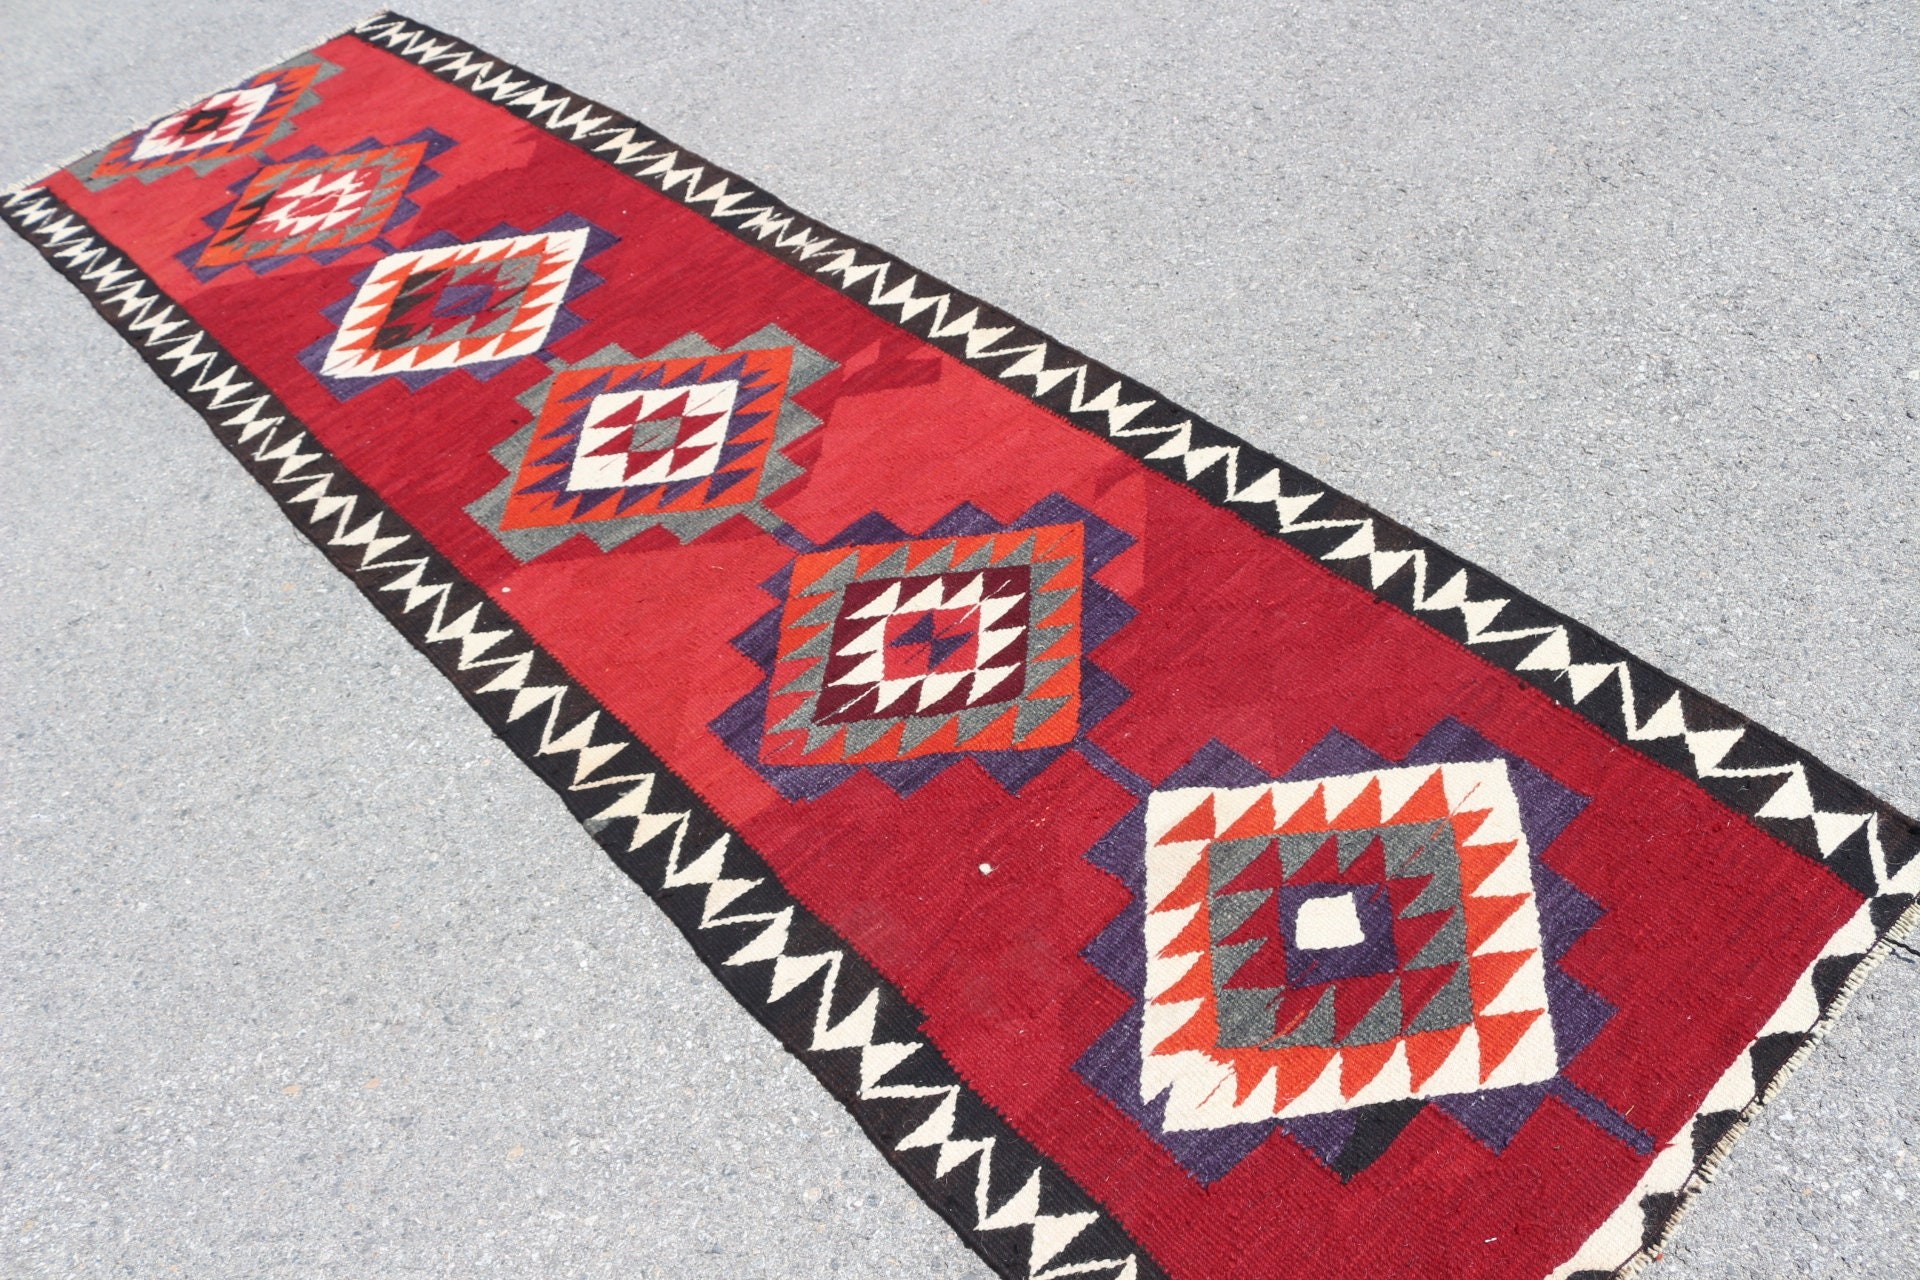 Moroccan Rugs, Vintage Rugs, Kitchen Rug, 3.1x11 ft Runner Rug, Turkish Rug, Hallway Rug, Stair Rugs, Red Anatolian Rugs, Rugs for Kitchen